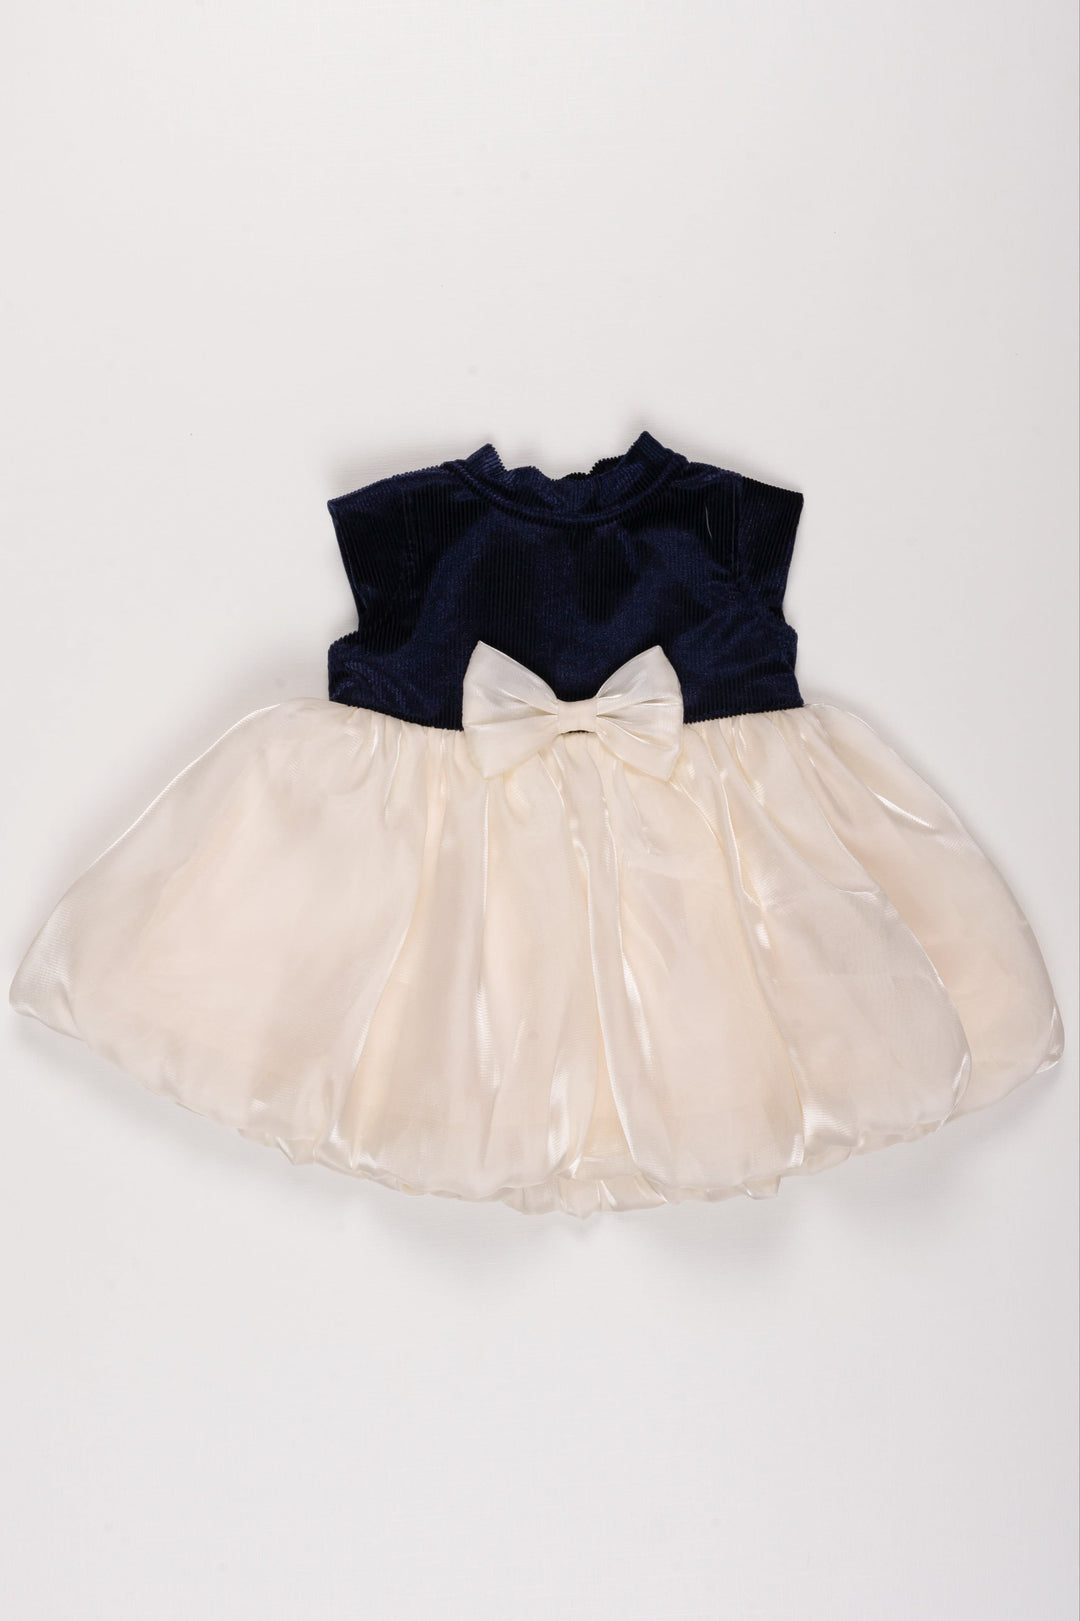 The Nesavu Girls Fancy Party Frock Navy Blue Organza and Cream Tulle Party Dress with Satin Bow for Girls Nesavu 10 (NB) / Blue / Organza PF168C-10 Girls Navy Blue Tulle Dress | Cream Skirt with Satin Bow Dress | The Nesavu